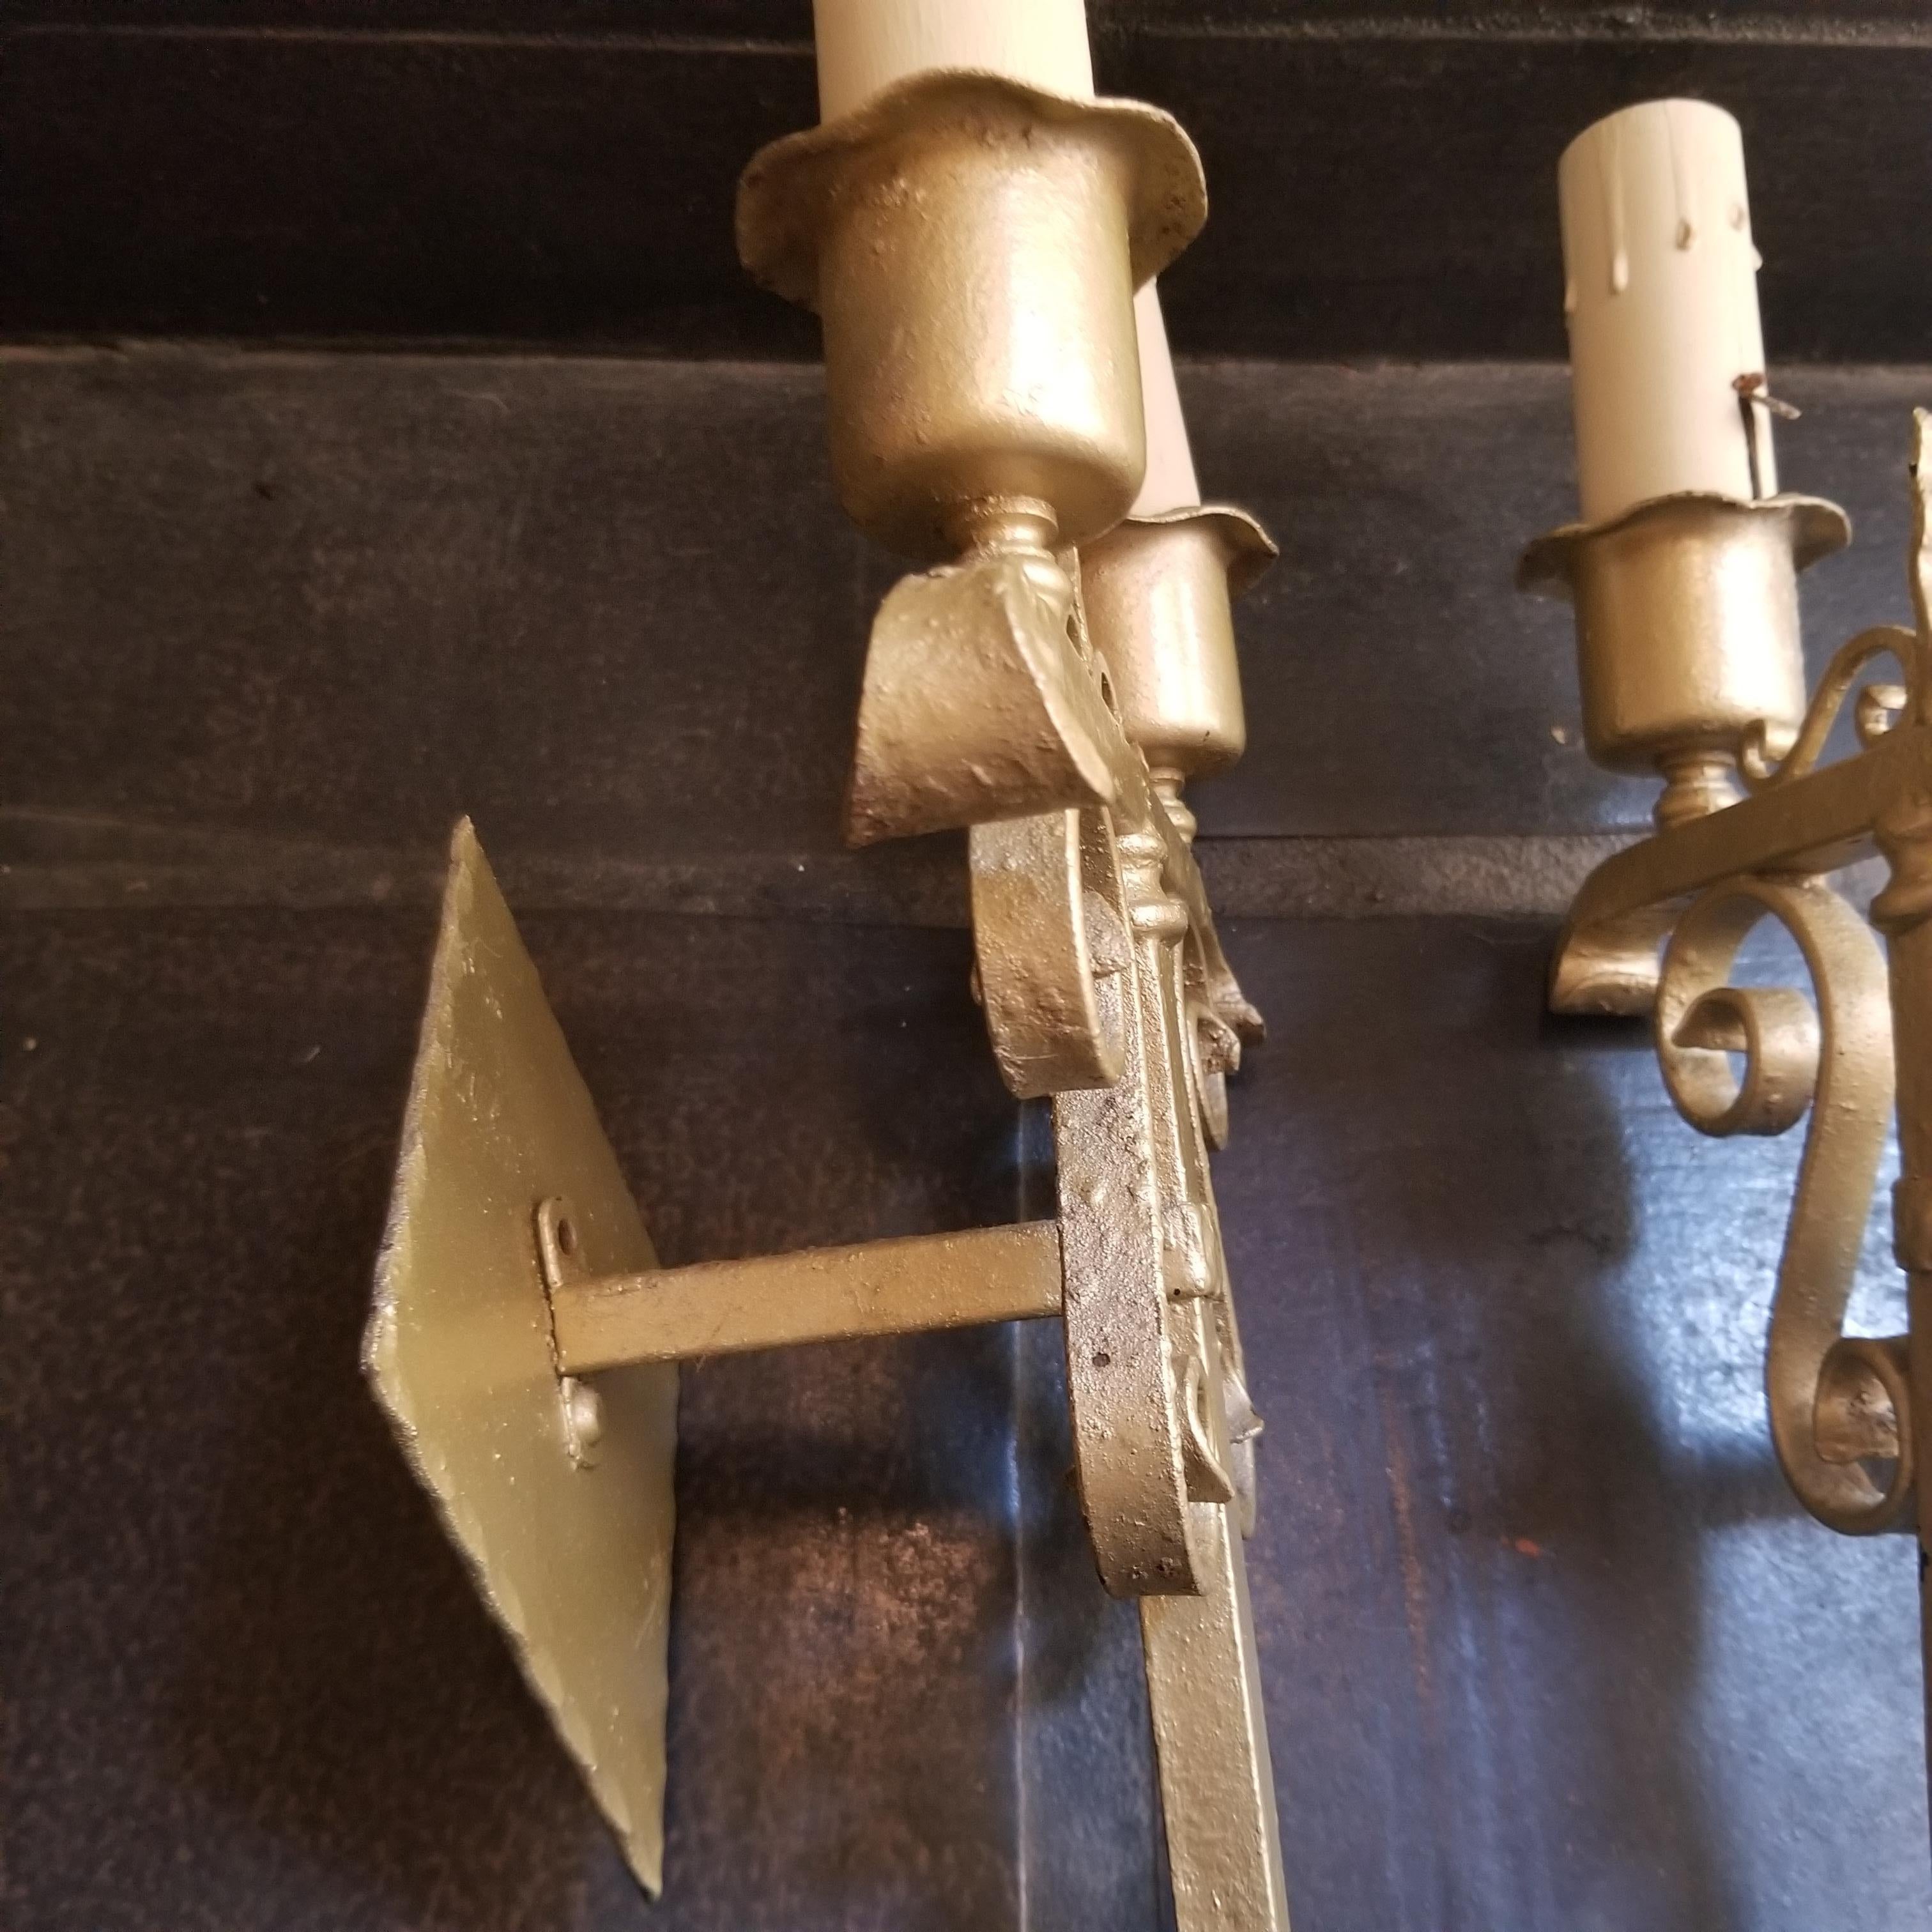 Candelabra Sconce
1960s pair of vintage gold gothic wrought iron scrolled candelabra electric wall sconces.
Strong firm and sturdy. Ideal as decorative garden stake.
Each sconce measures approximately 20.25 Tall x 4 Deep x 8 wide